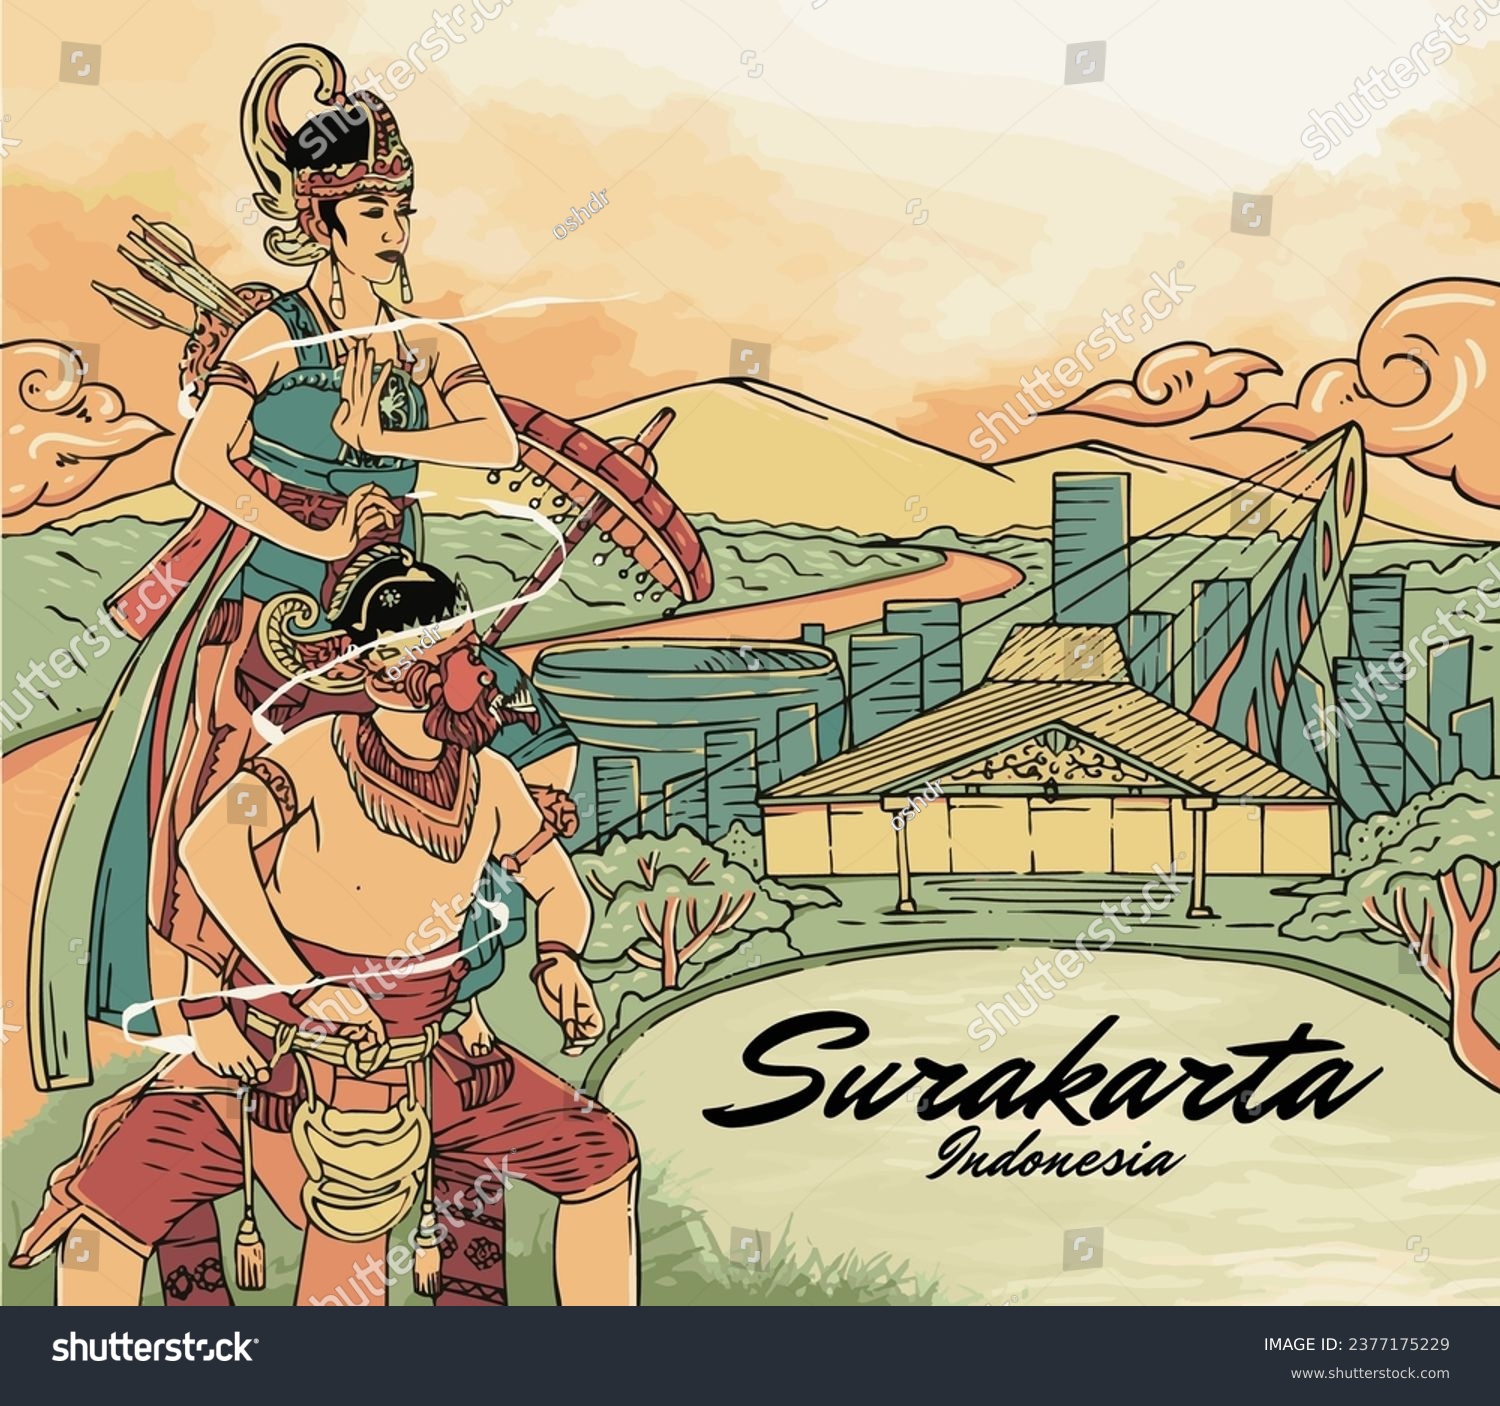 SVG of Culture of Central Java Indonesia. Bambangan Cakil dance with the background of Surakarta City svg